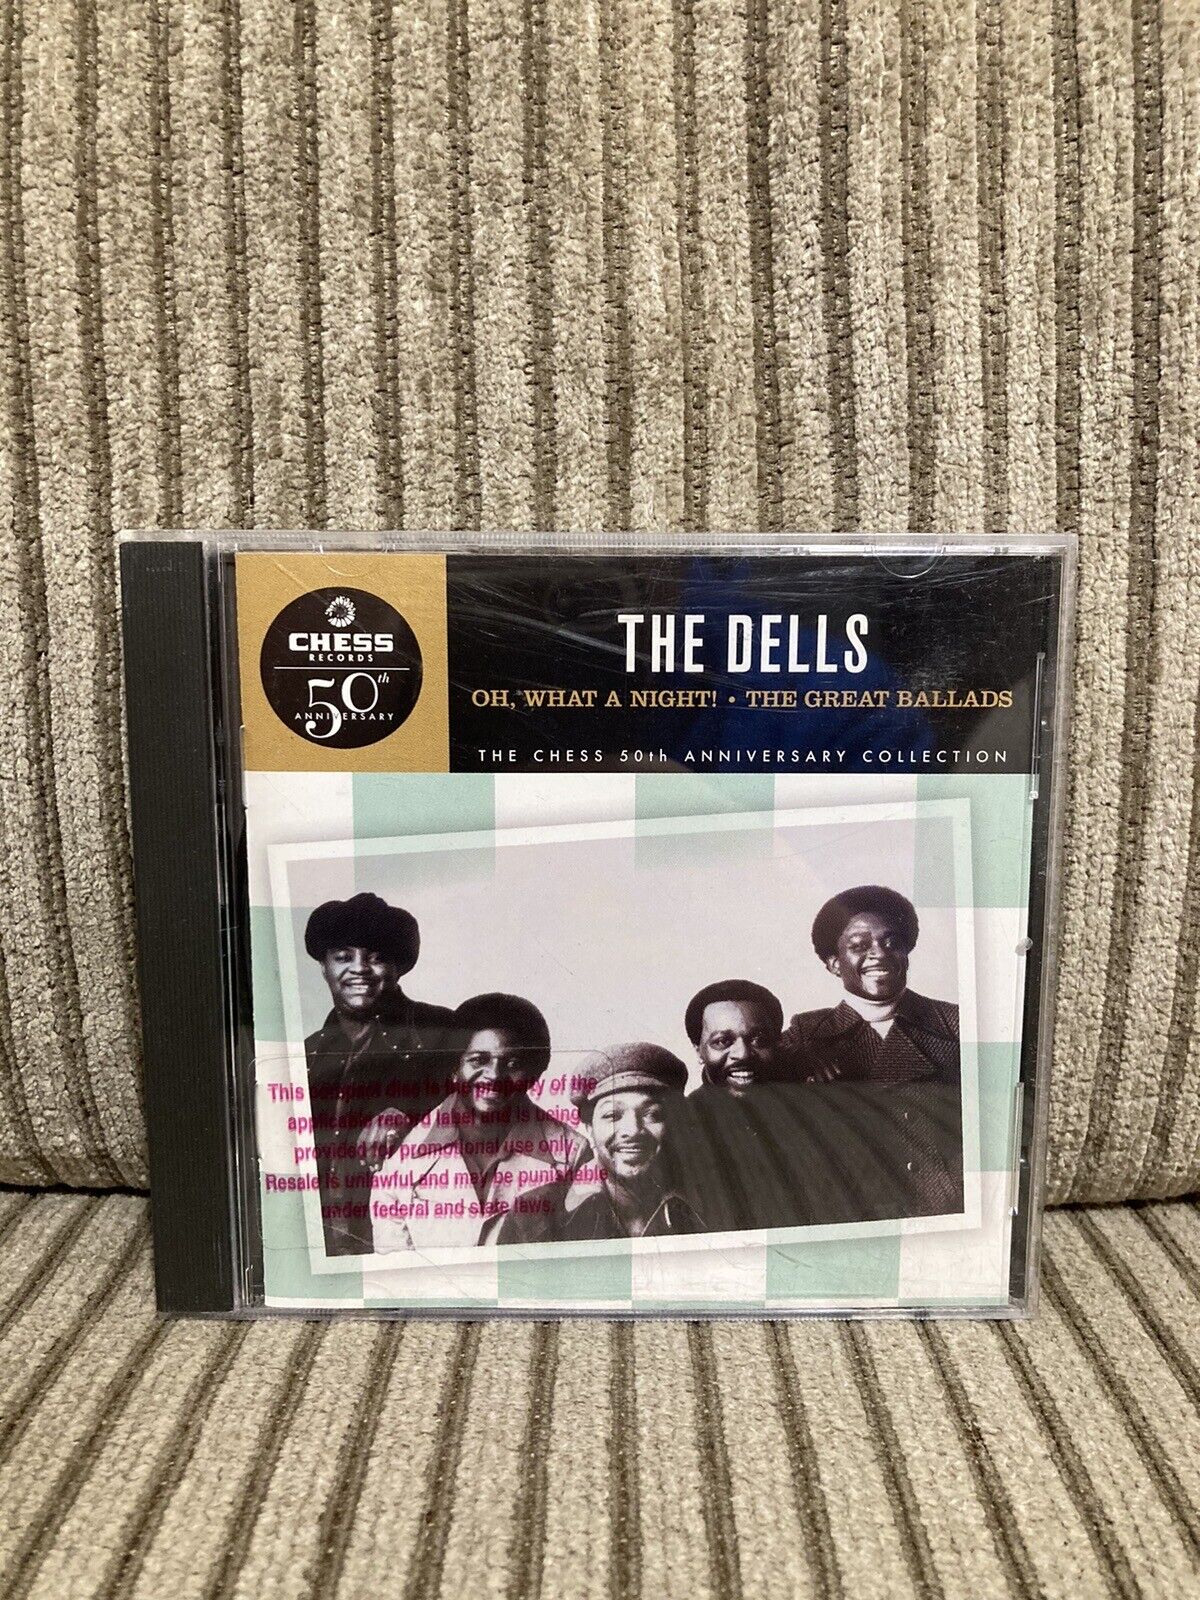 The Dells Oh, What A Night / The Great Ballads CD 1998 Chess Records 50th Annive